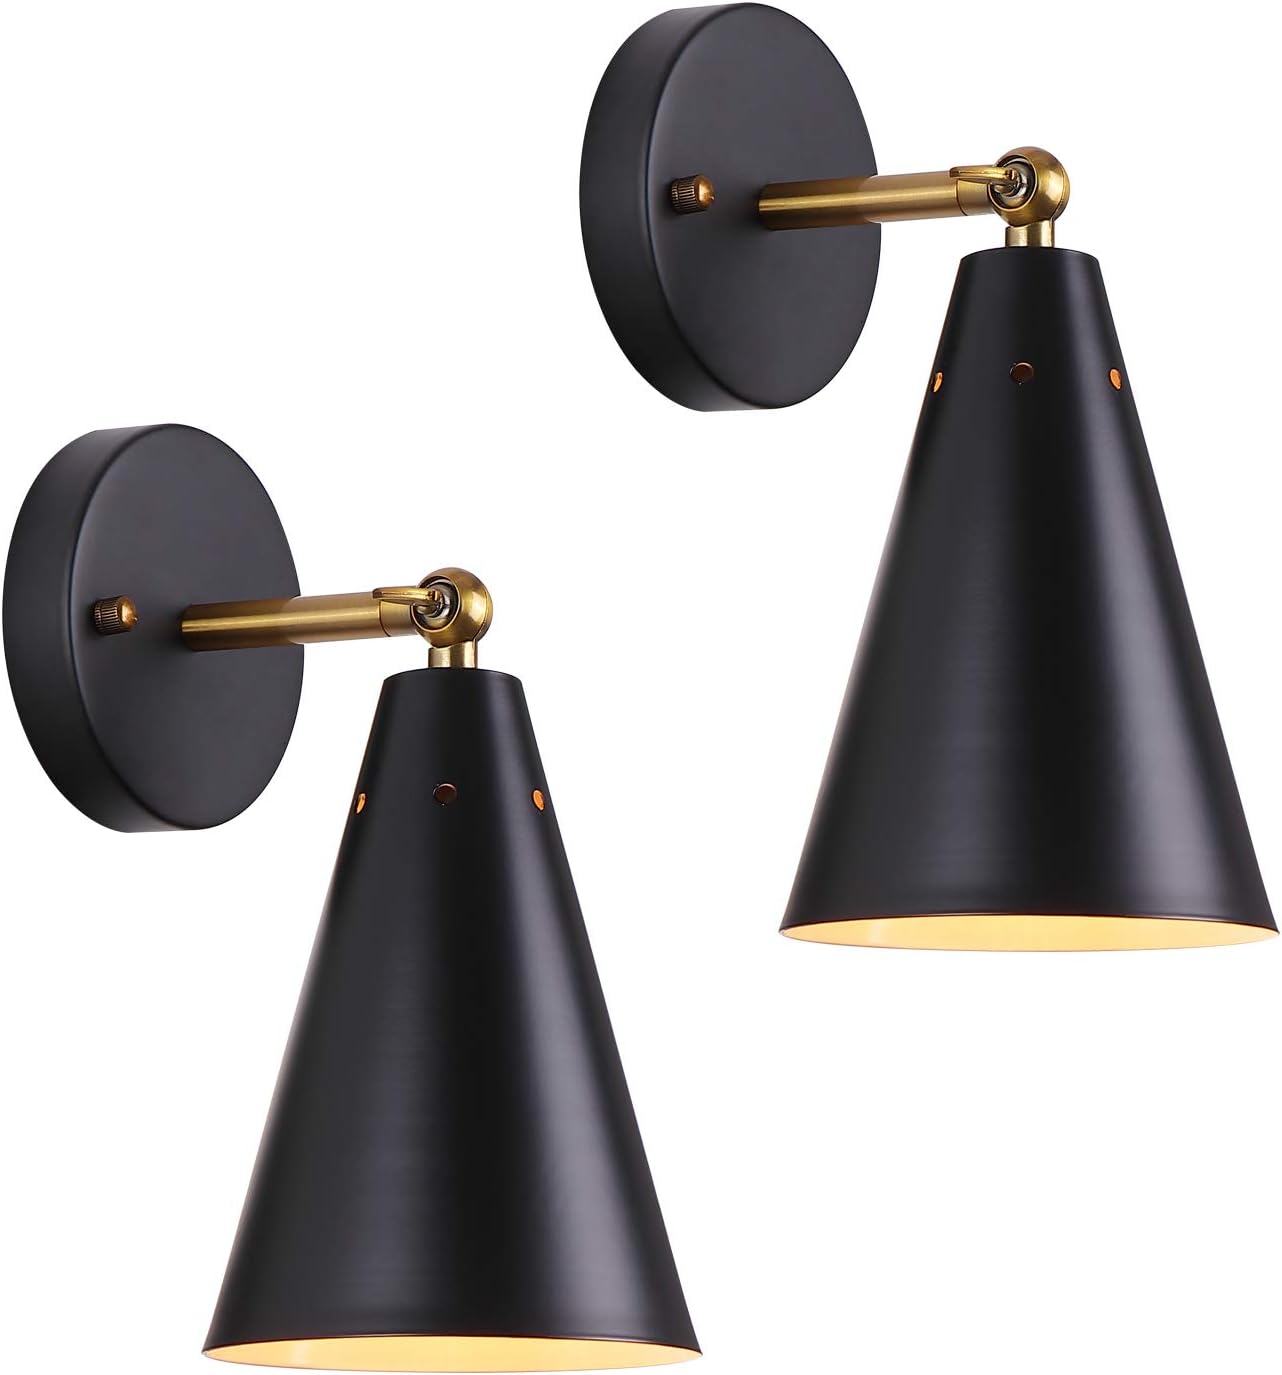 MWZ Modern Black Wall Sconces Lighting, 2 Pack Gold Rustic Wall Sconce Fixture Farmhouse Wall Lamp Simplicity Bronze Finish Arm Swi